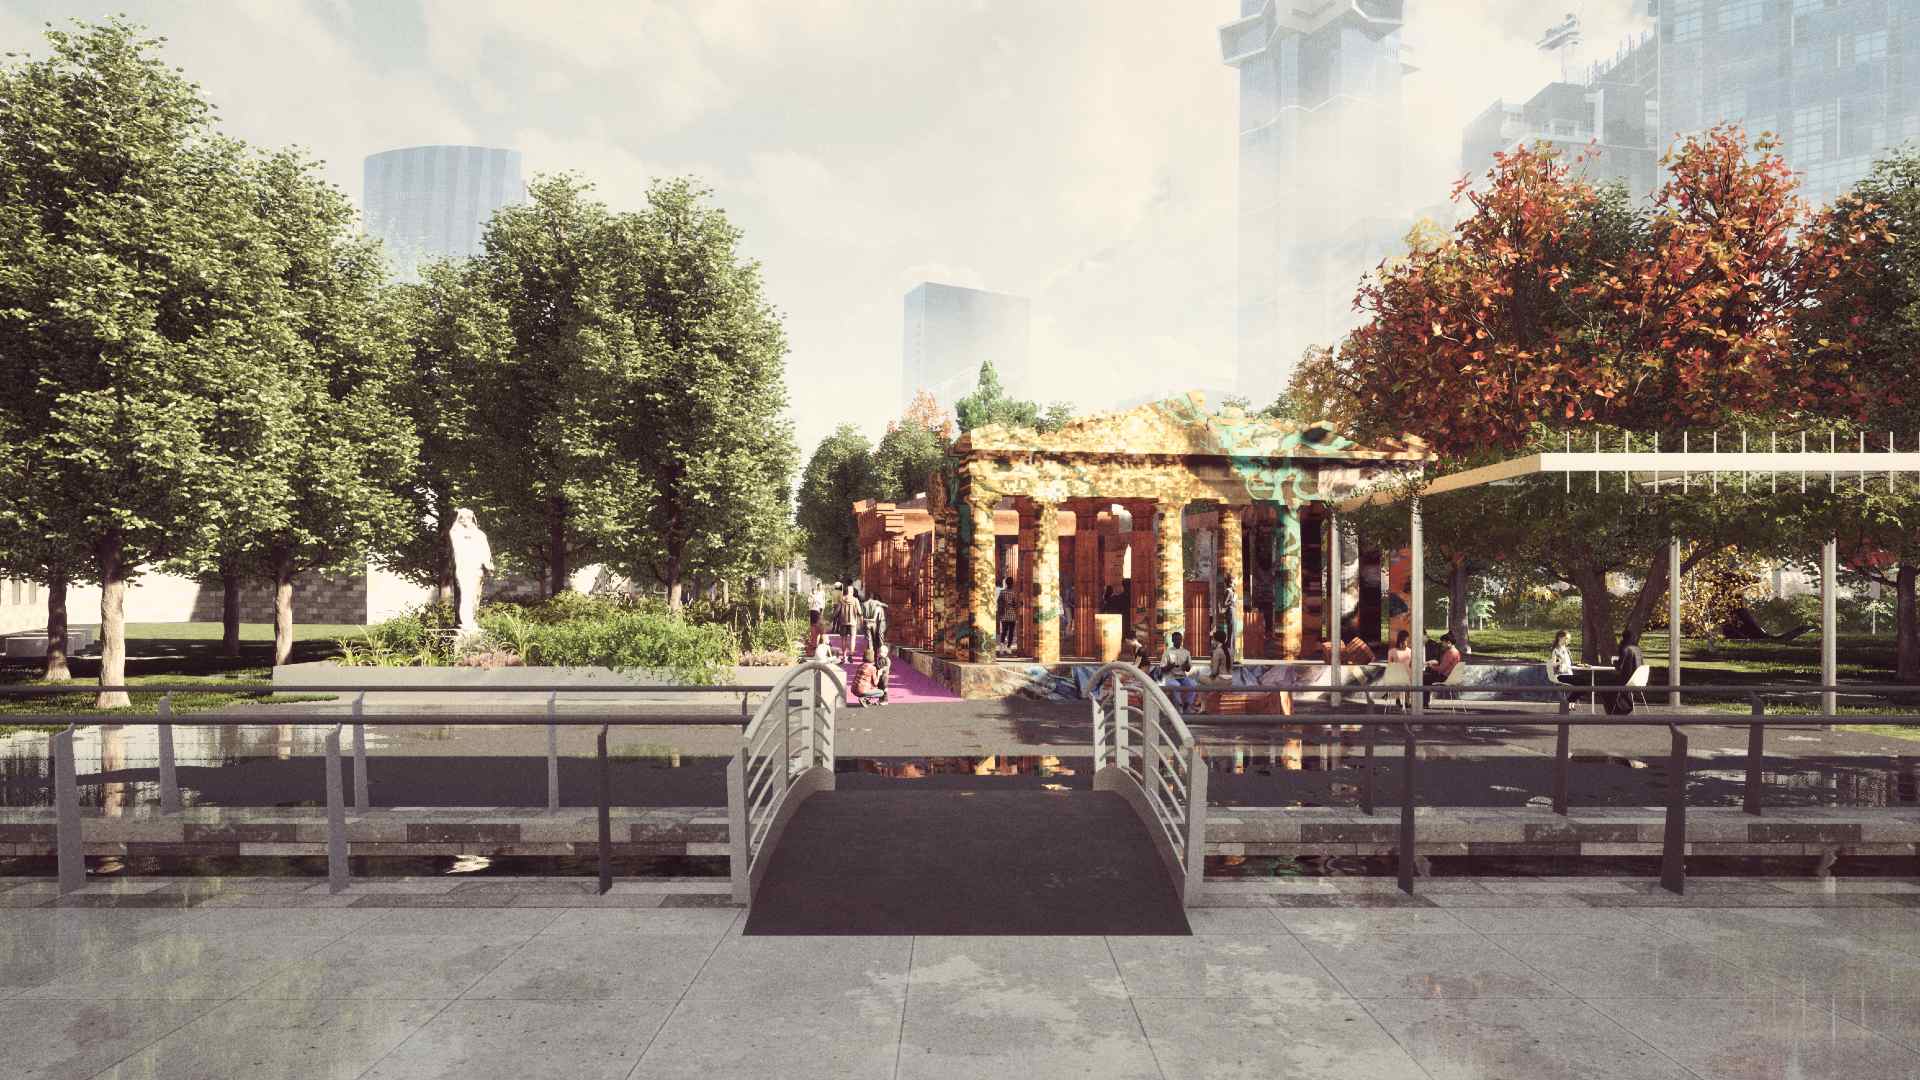 An Art-Clad Replica of Greece's Parthenon Will Pop Up Outside the NGV for Summer